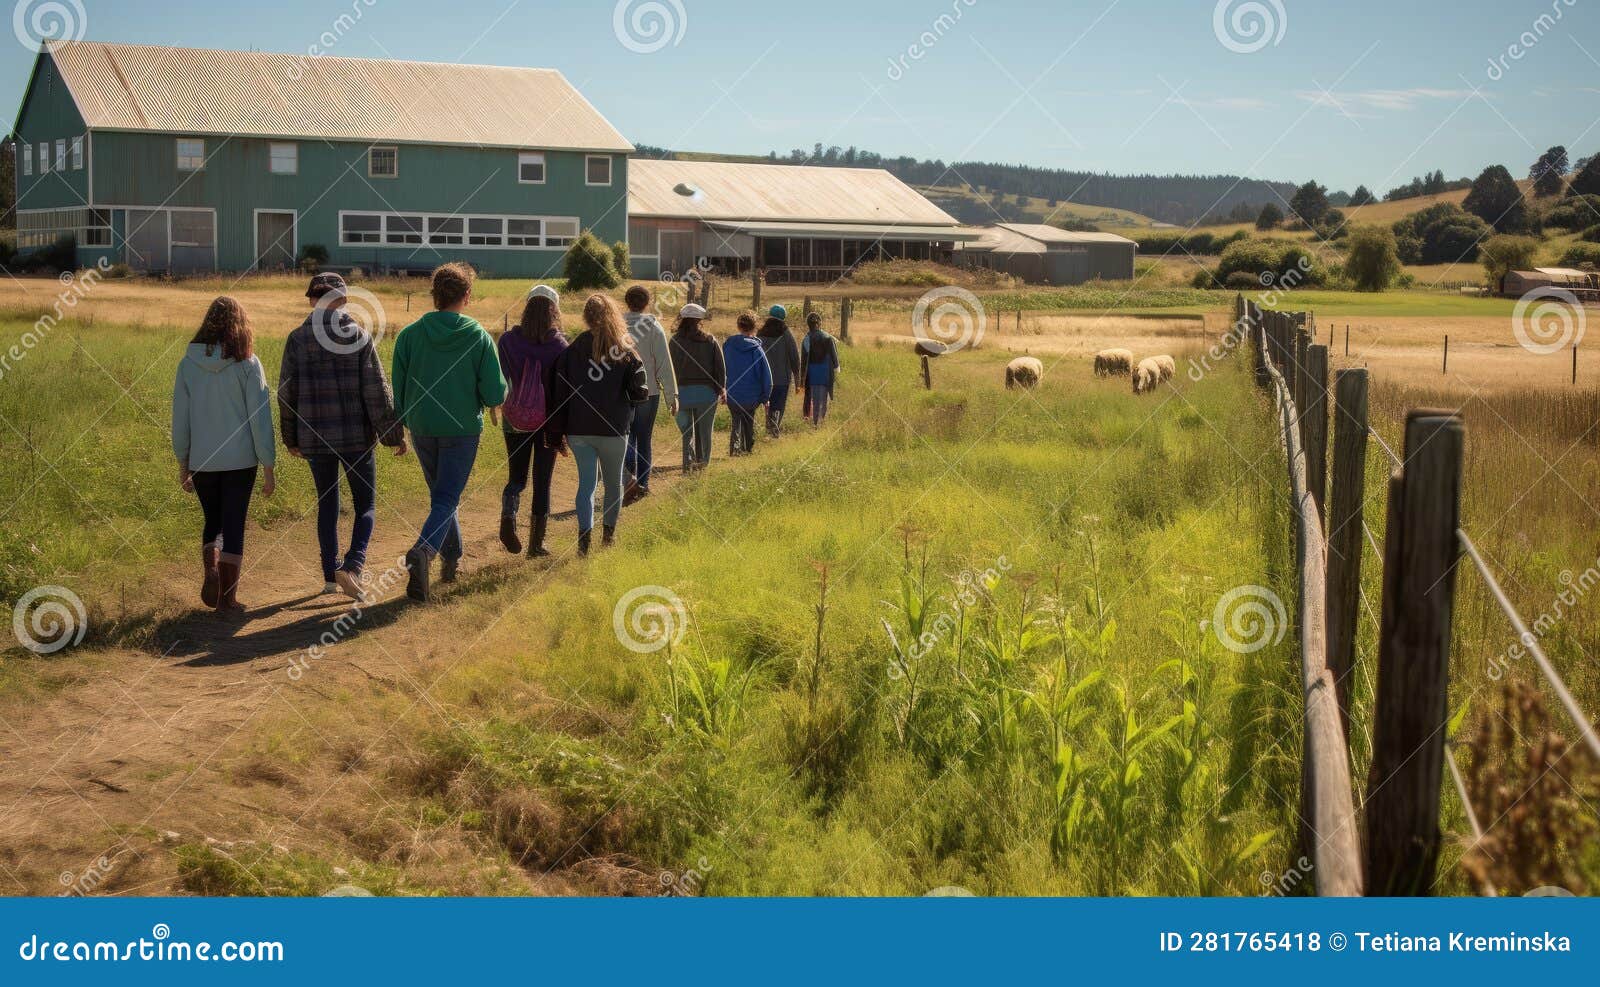 importance of field trip in agriculture